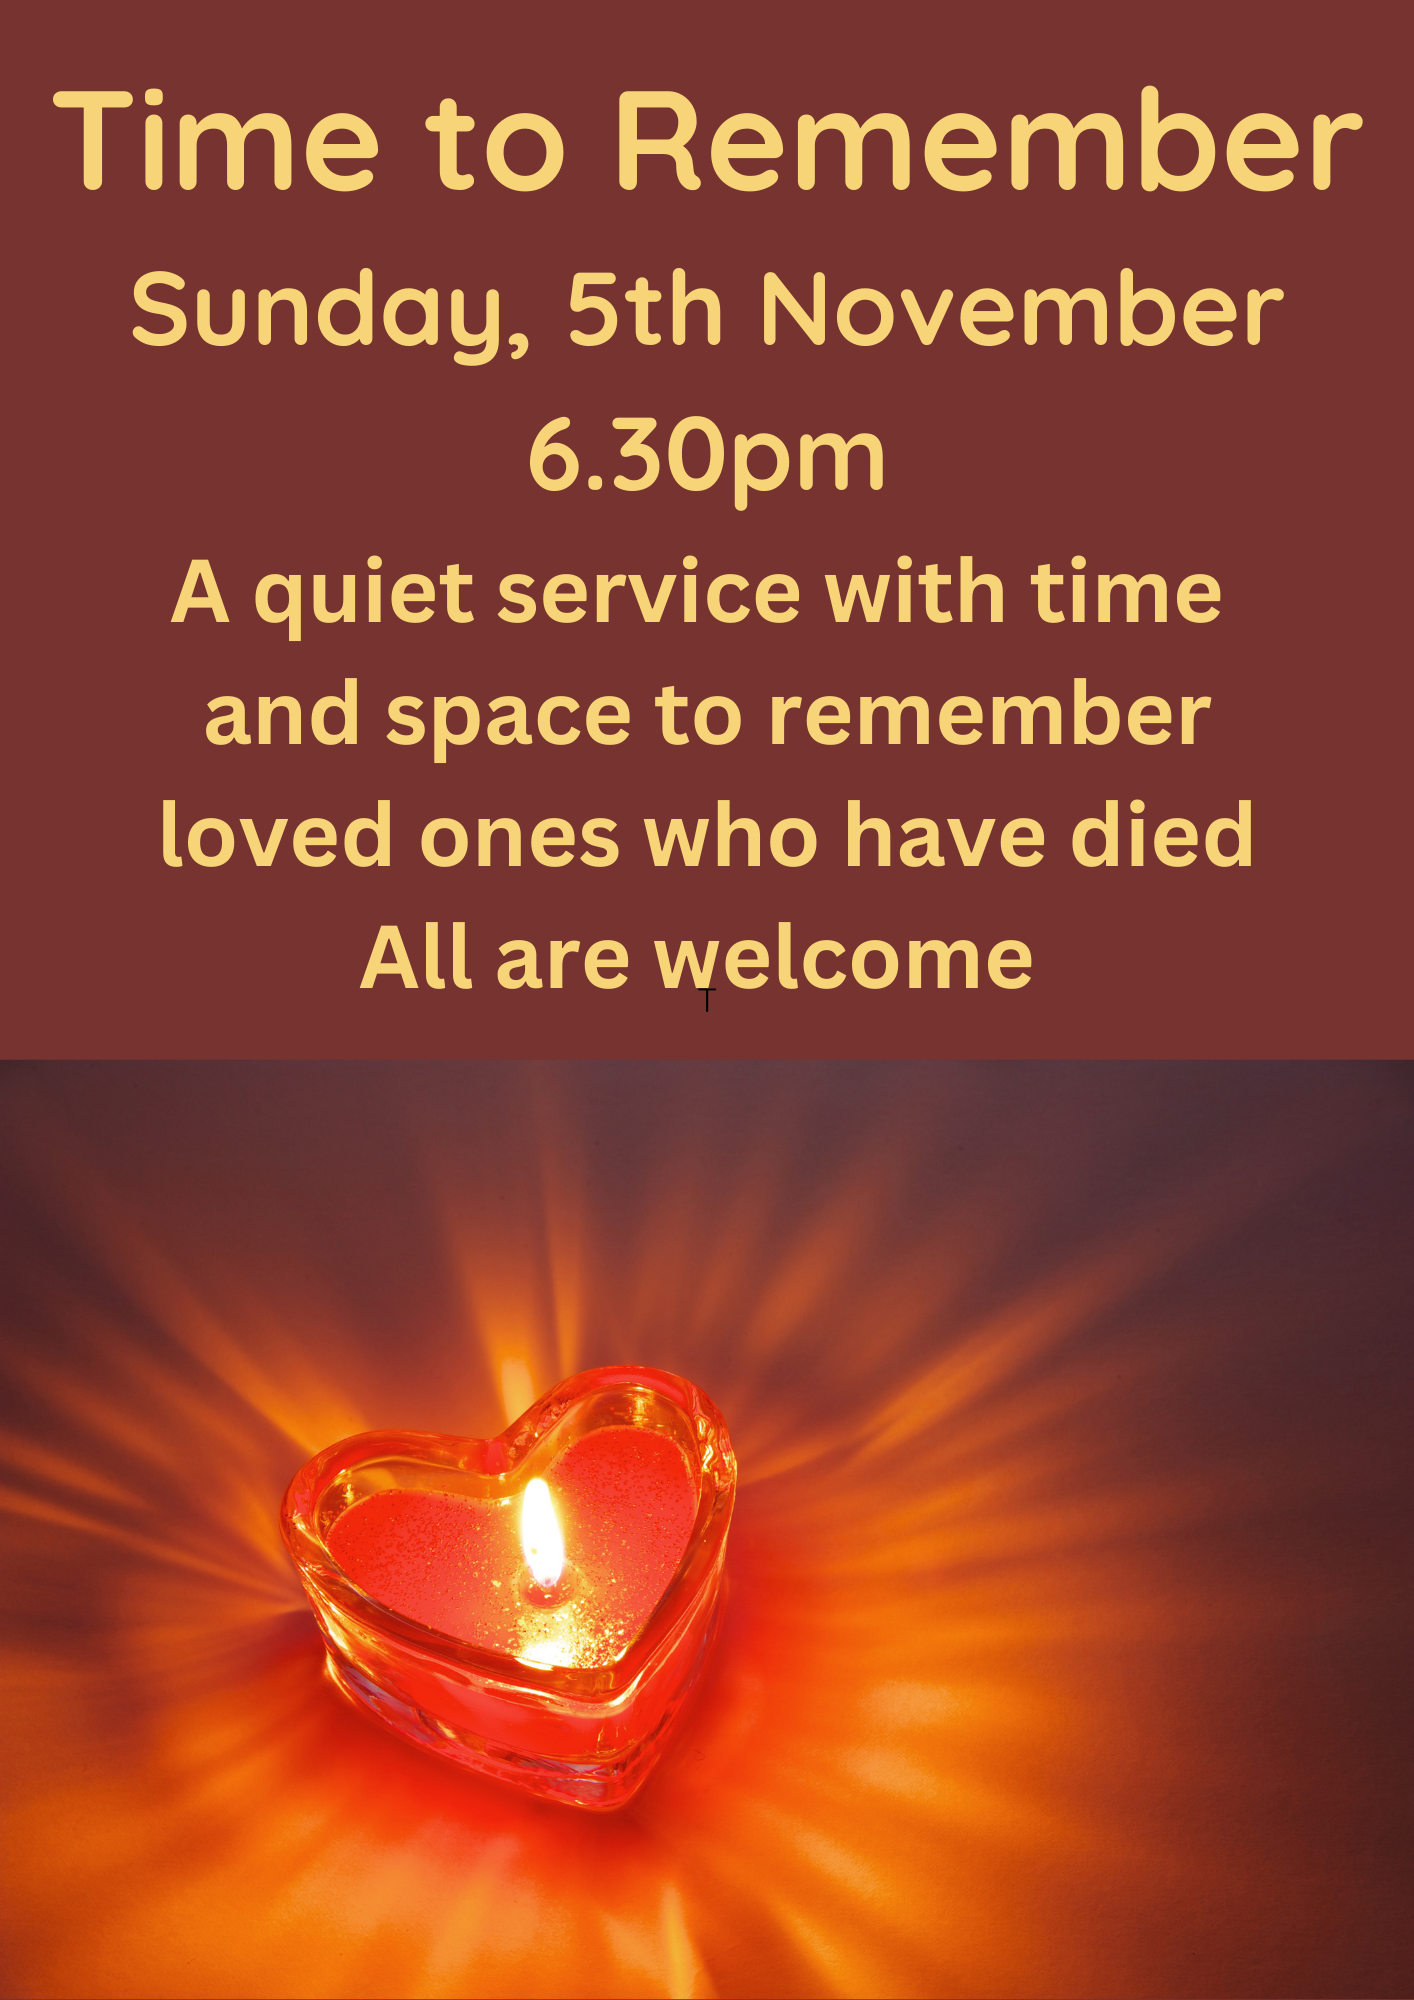 Picture of Candles with the text Time to Remember, Sunday 5th November, 6.30pm.